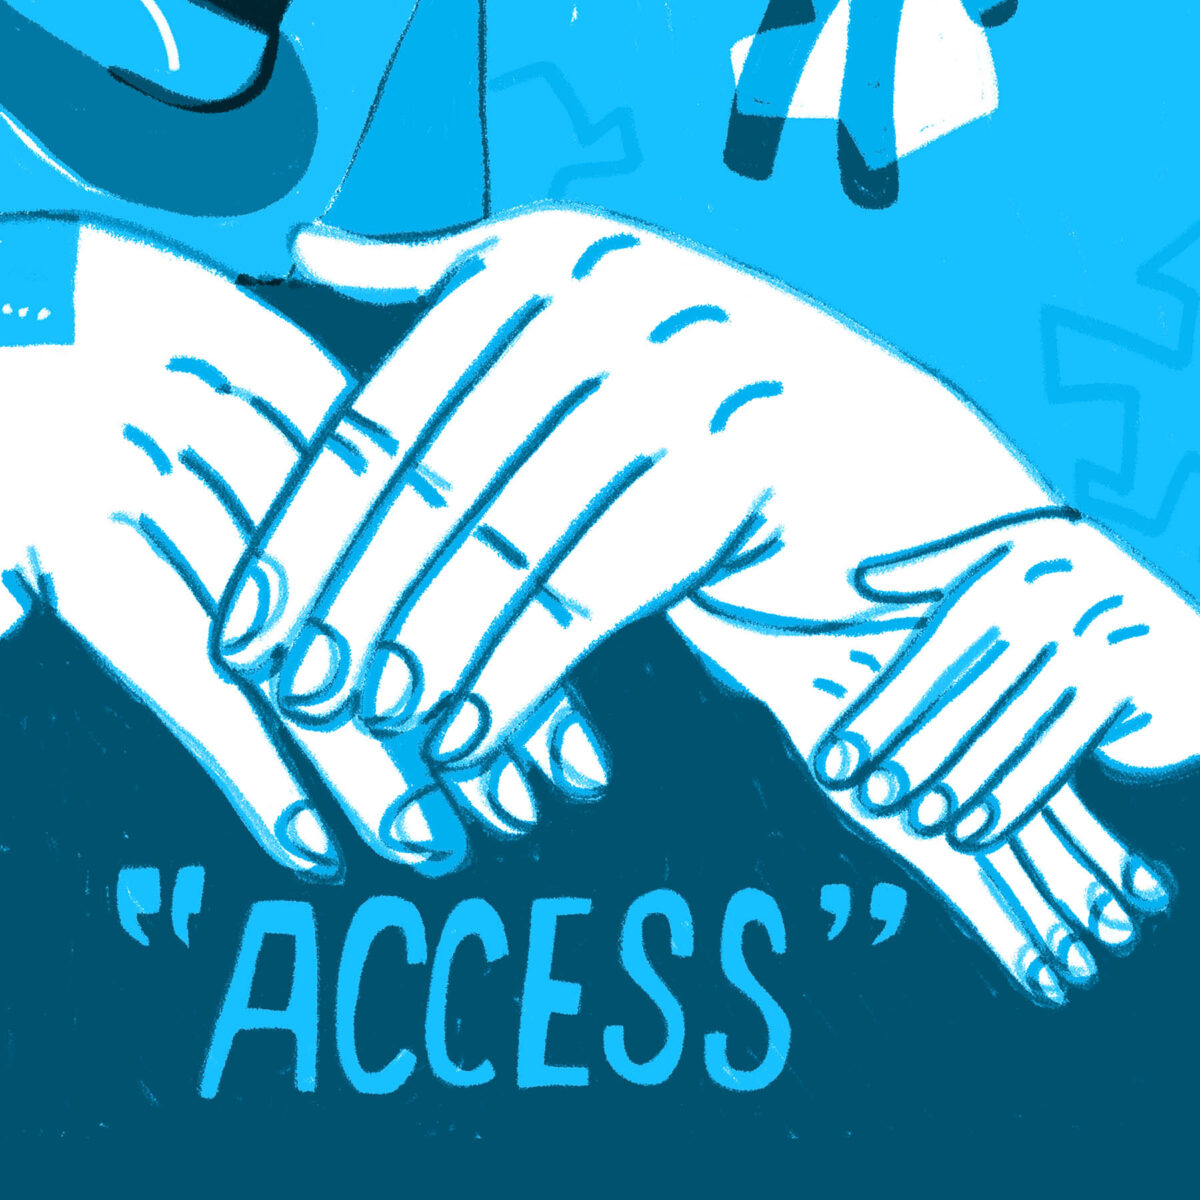 An illustration of hands signing access, drawn in shades of blue.